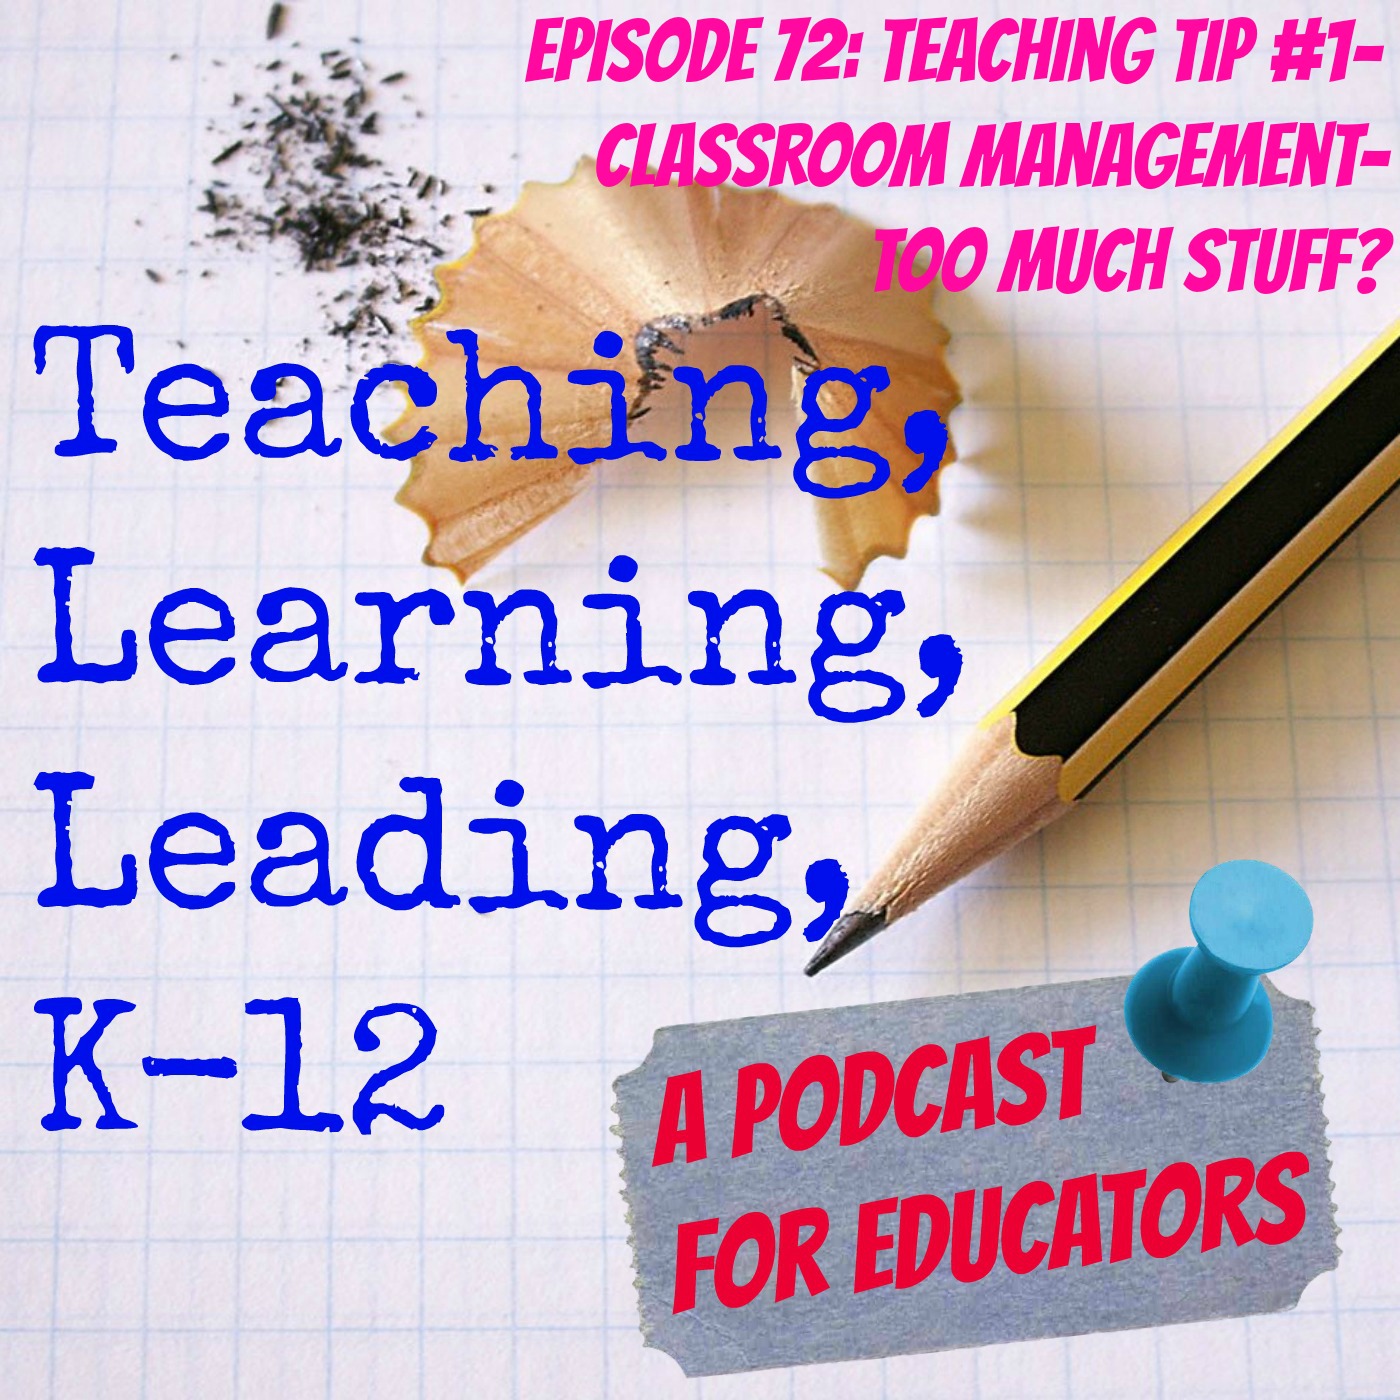 Episode 72: Teaching Tip#1-Classroom Management- Do you have too much stuff?